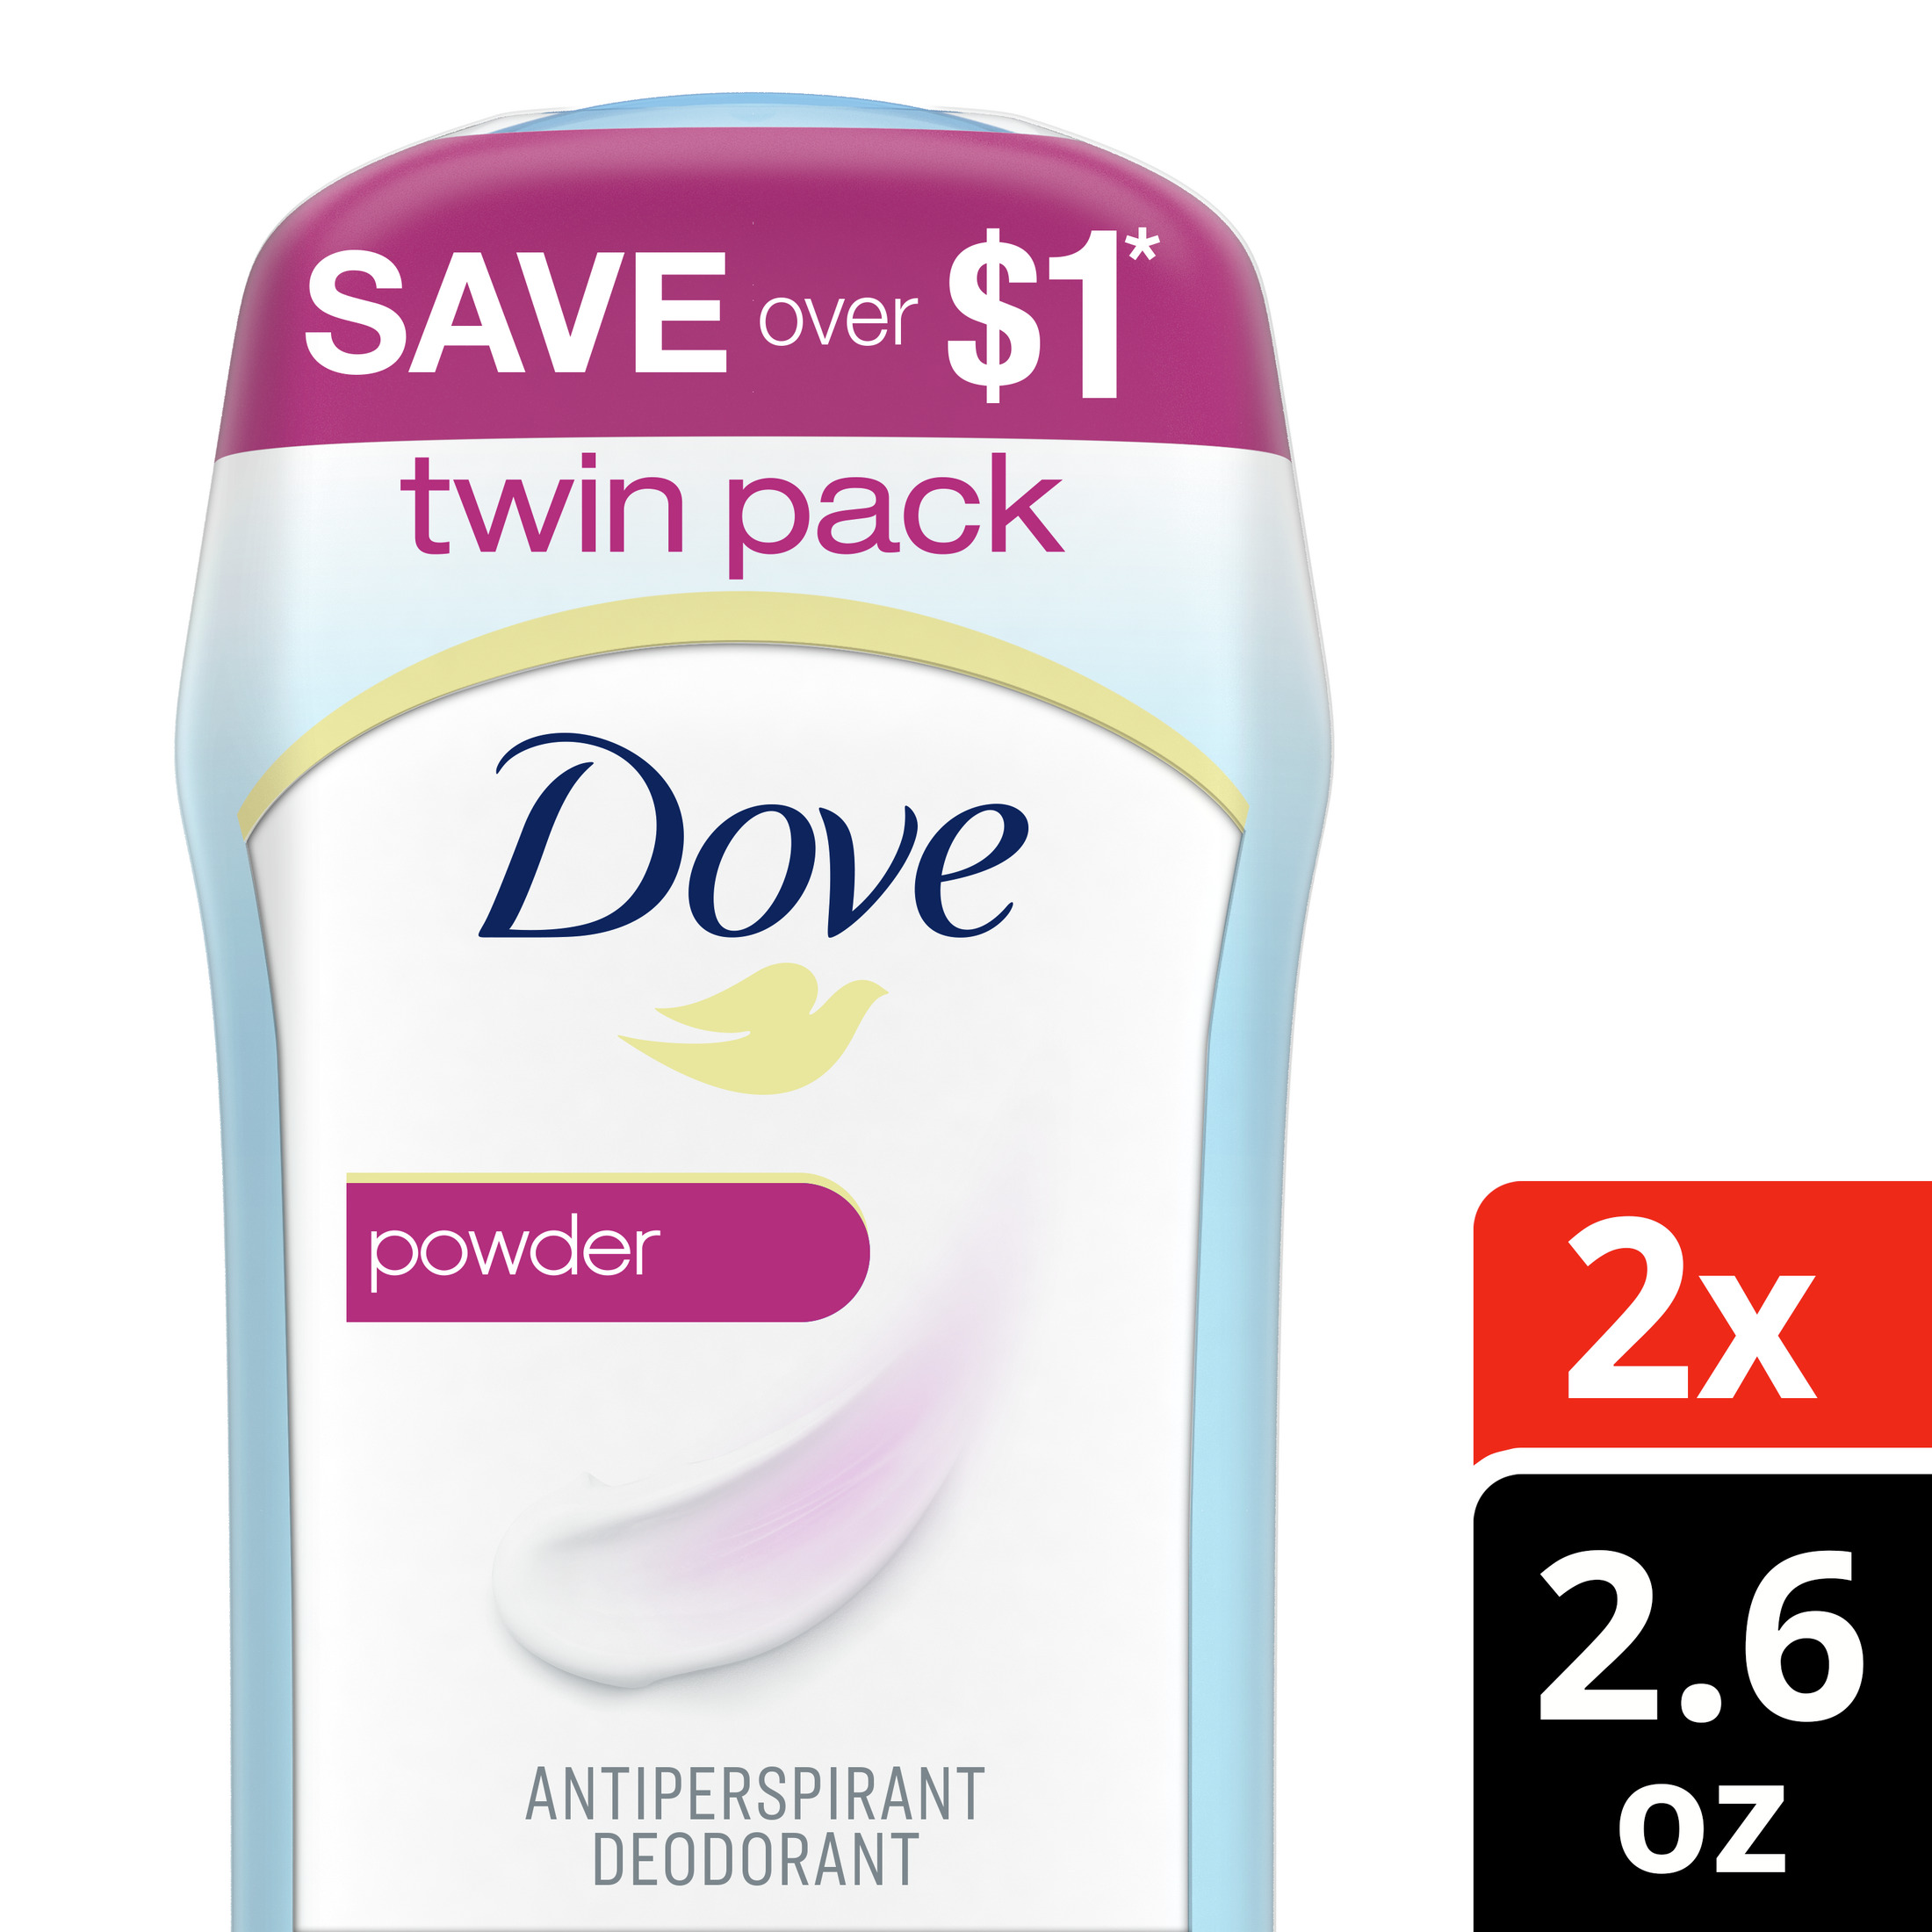 Dove Sweat and Odor Protection Women's Antiperspirant Deodorant Stick Twin Pack, Powder, 2.6 oz - image 3 of 11